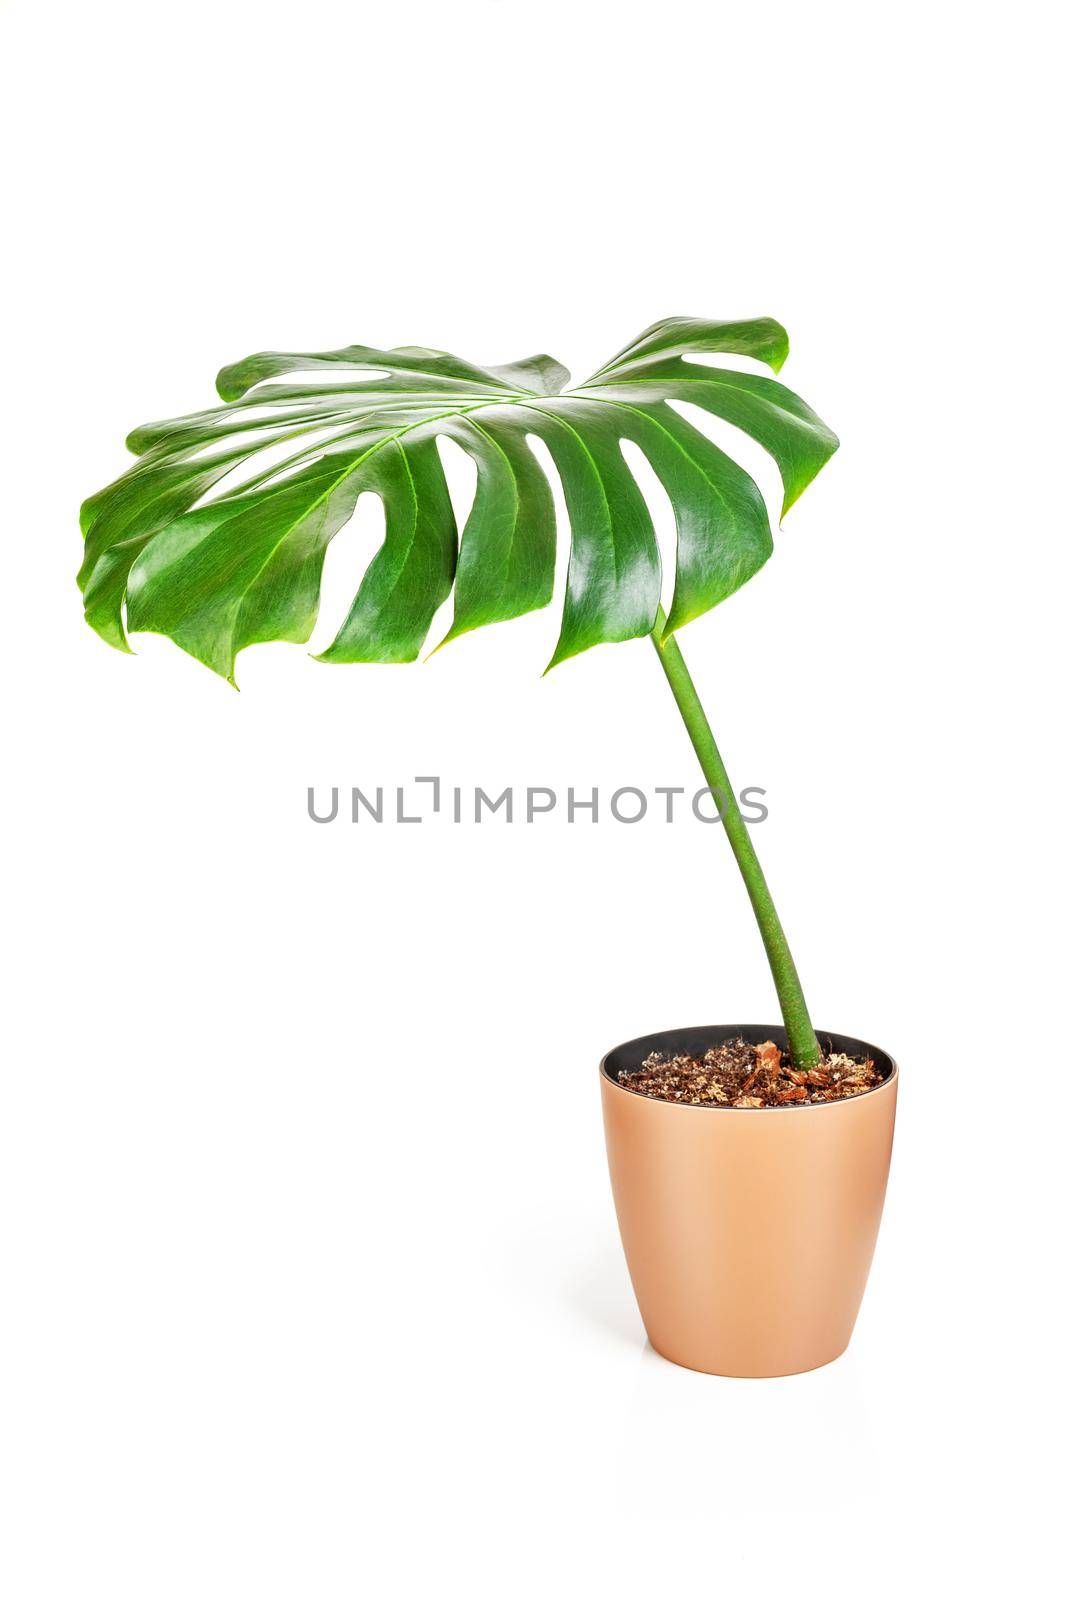 Monstera Deliciosa plant in brown platic pot. Isolated on white background